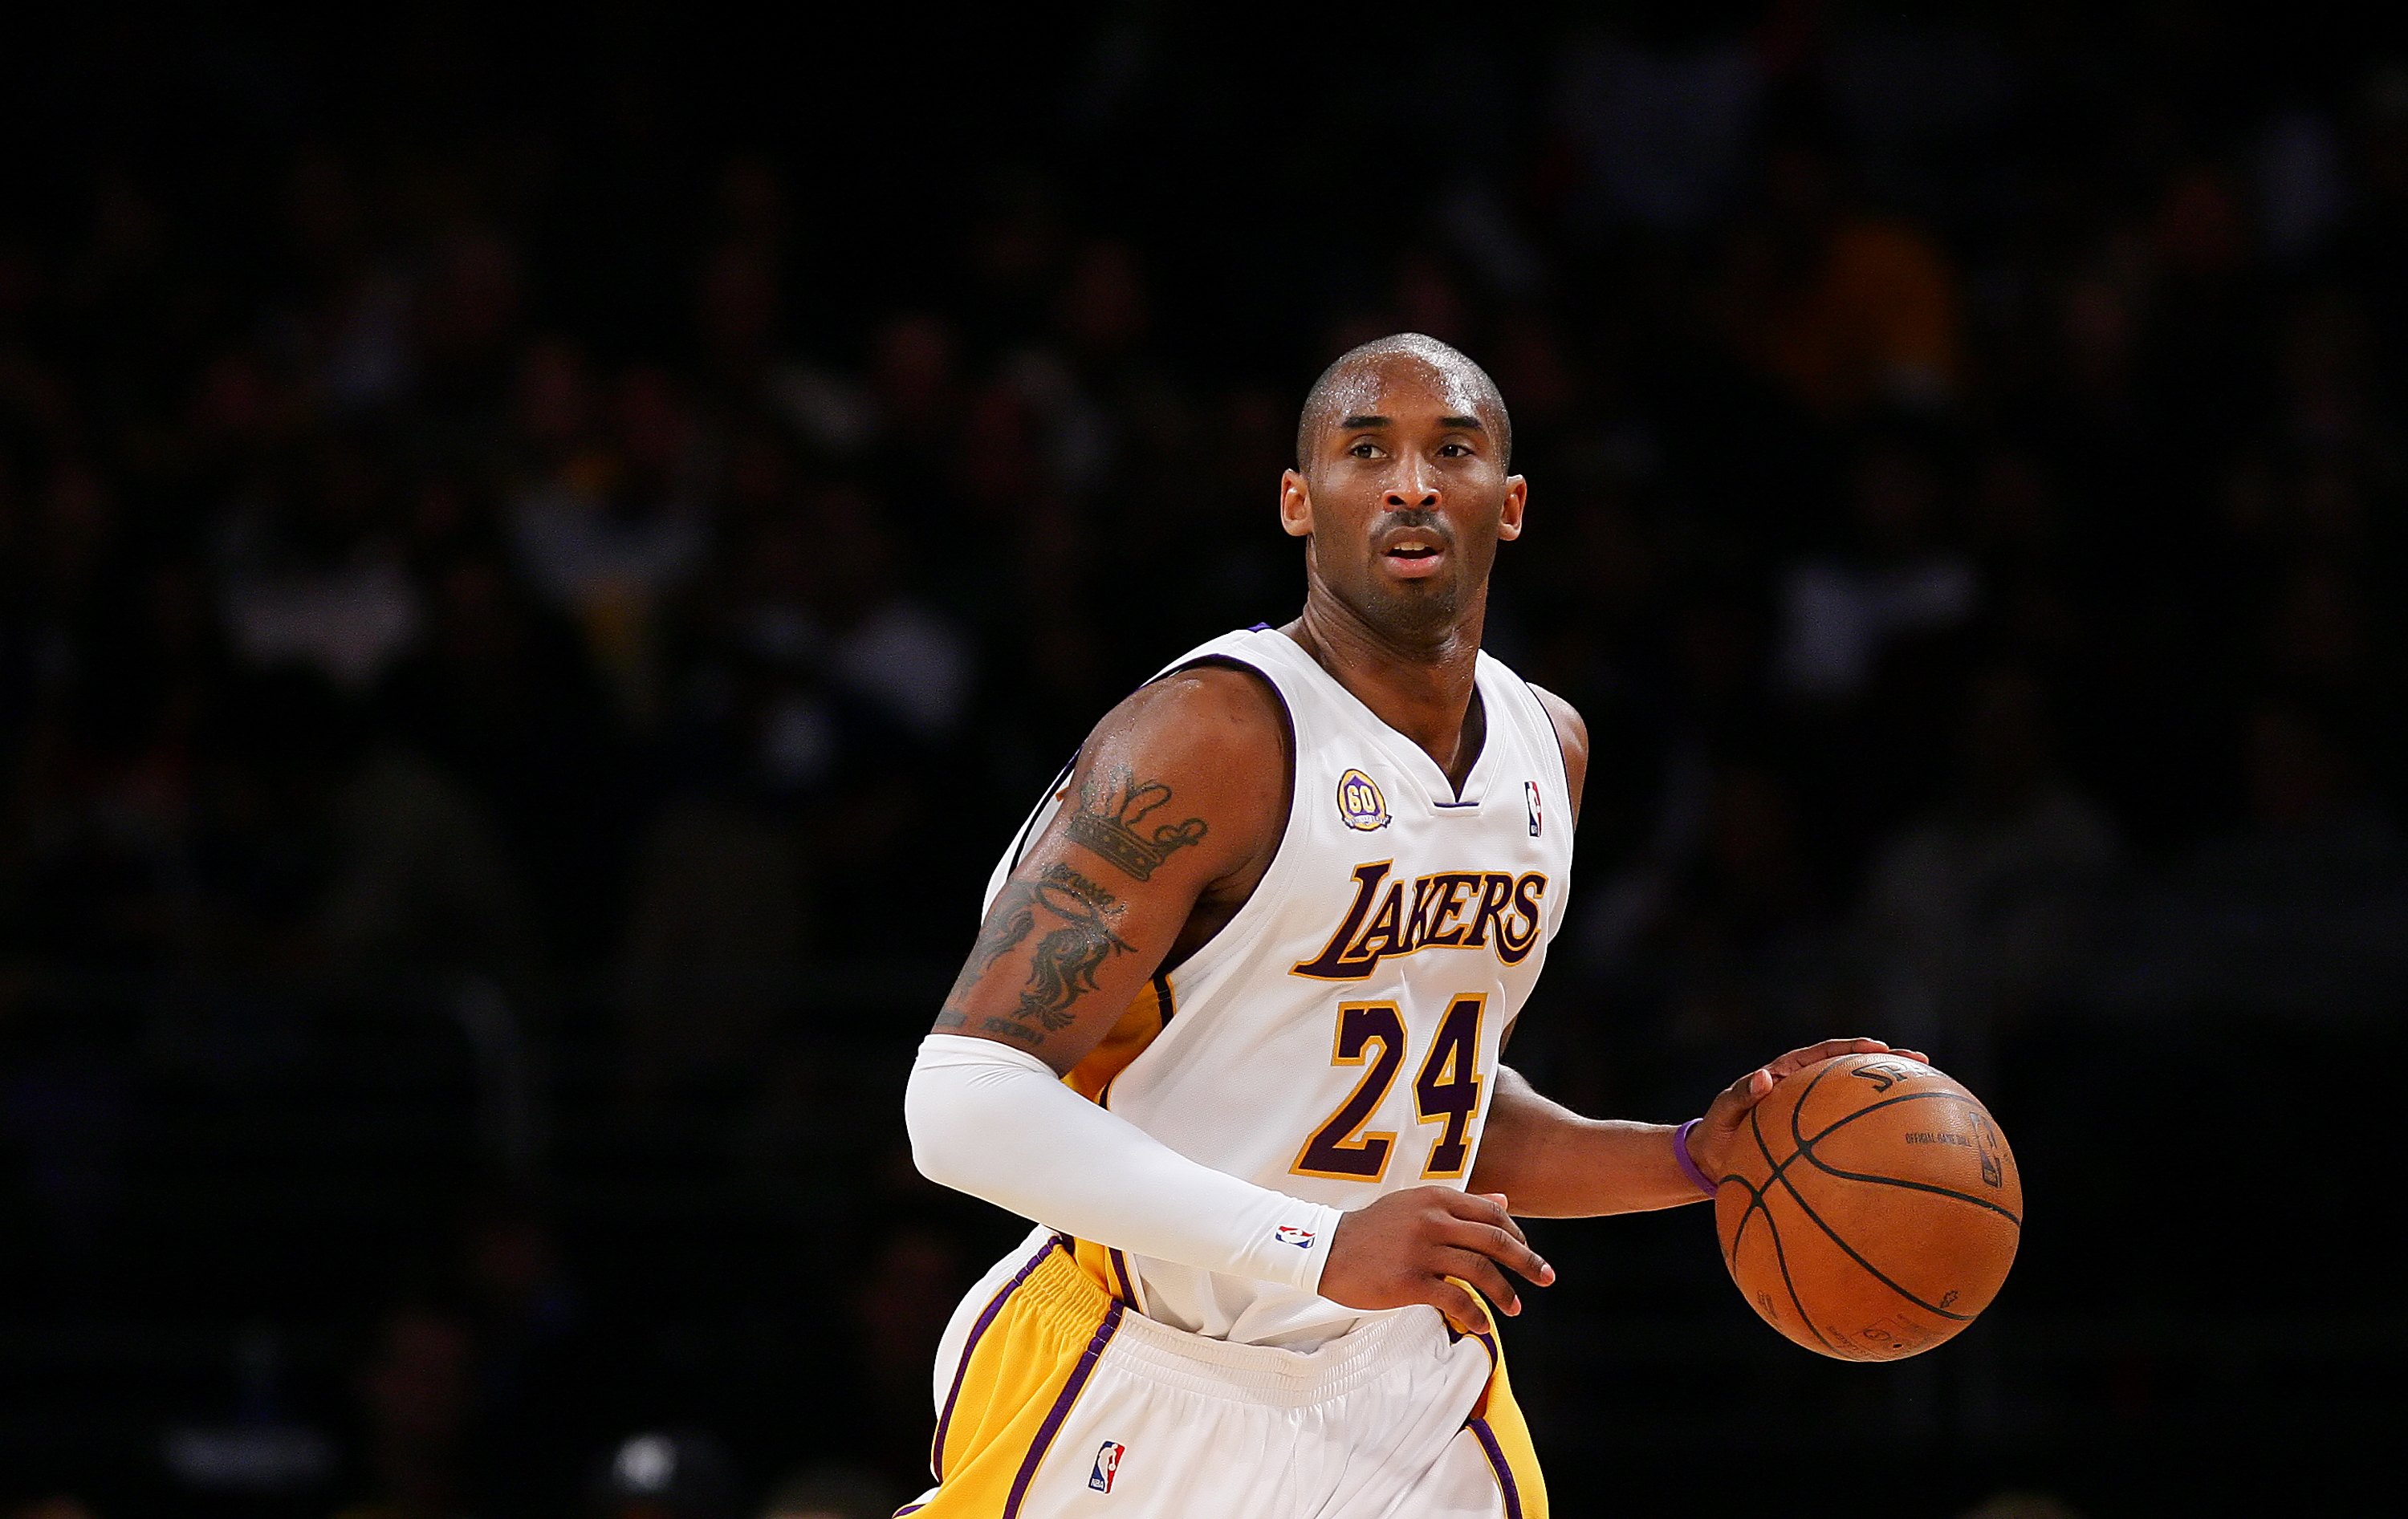 WHEN ALLEN WAS COMING BACK FROM THE CLUB AT 6 AM, KOBE WAS GETTING UP AND  WORKING OUT” - Basketball Network - Your daily dose of basketball